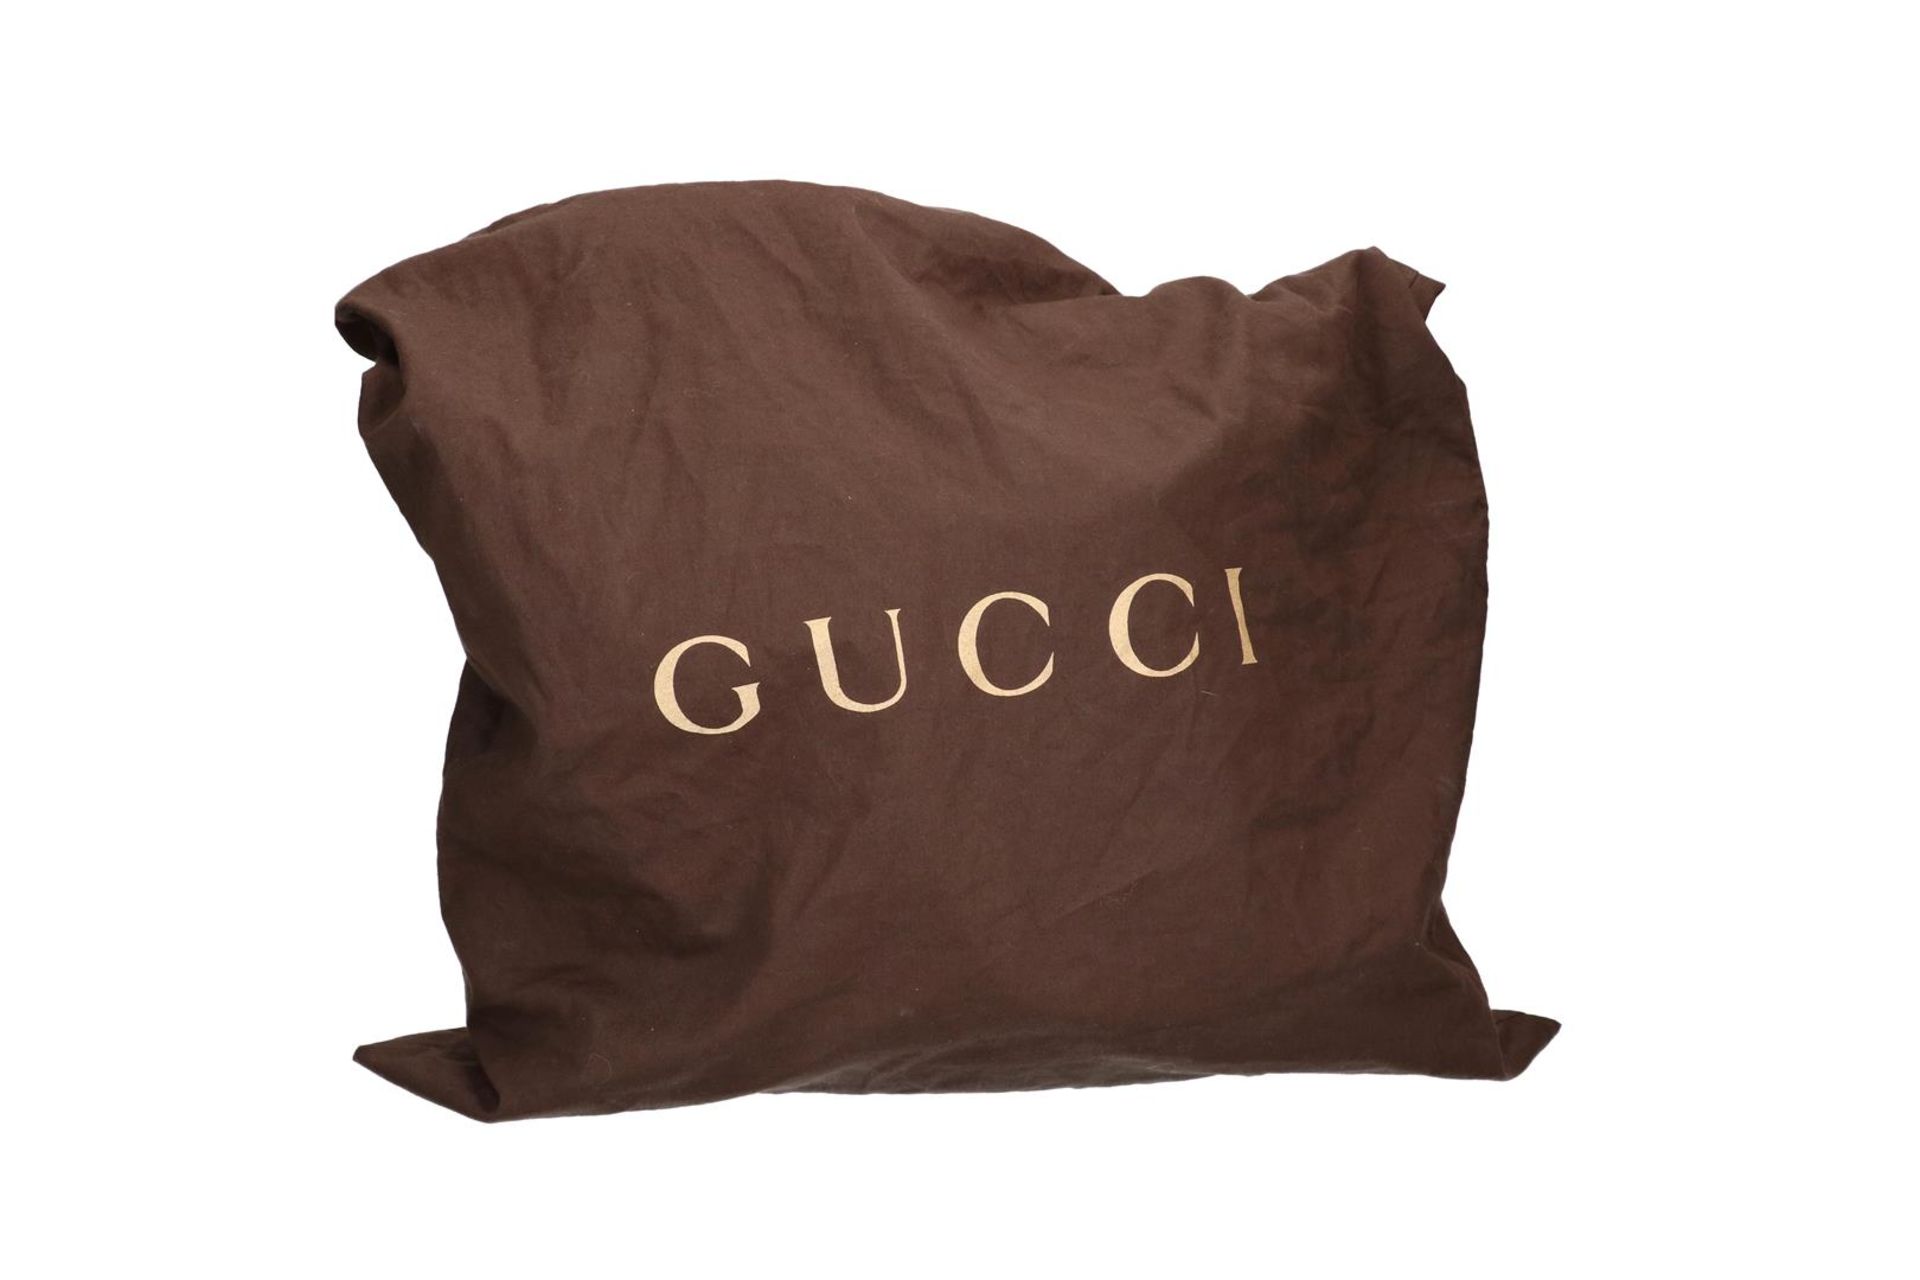 Gucci, brown leather tote bag, 'Bamboo', with leather shouldestrap and dust cover. H x W x D: 31 x 3 - Image 4 of 5